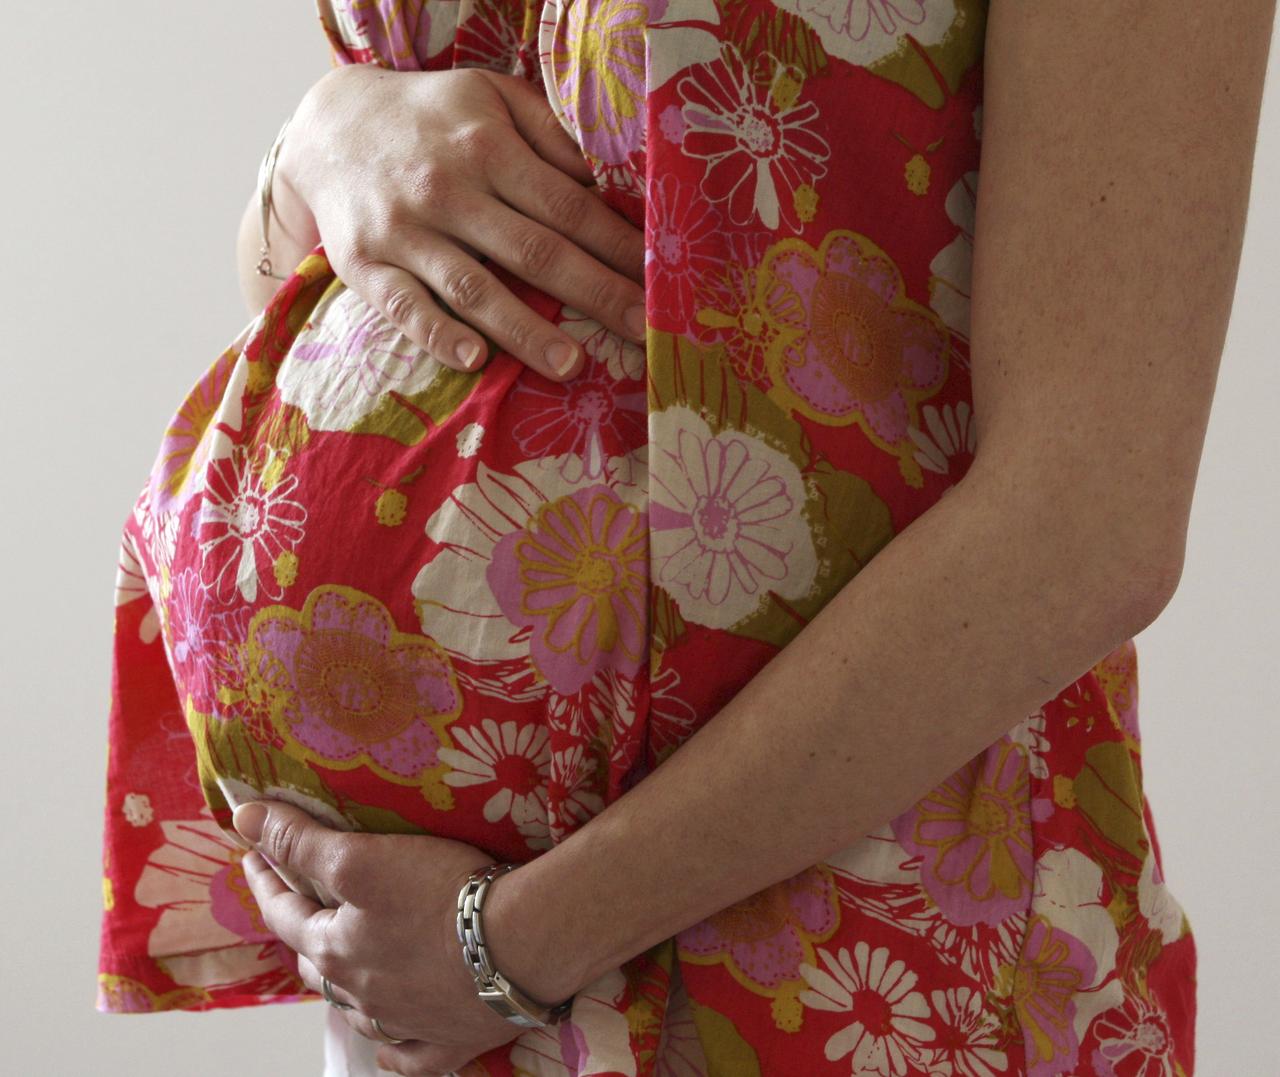 a reuters file photo of a pregnant woman